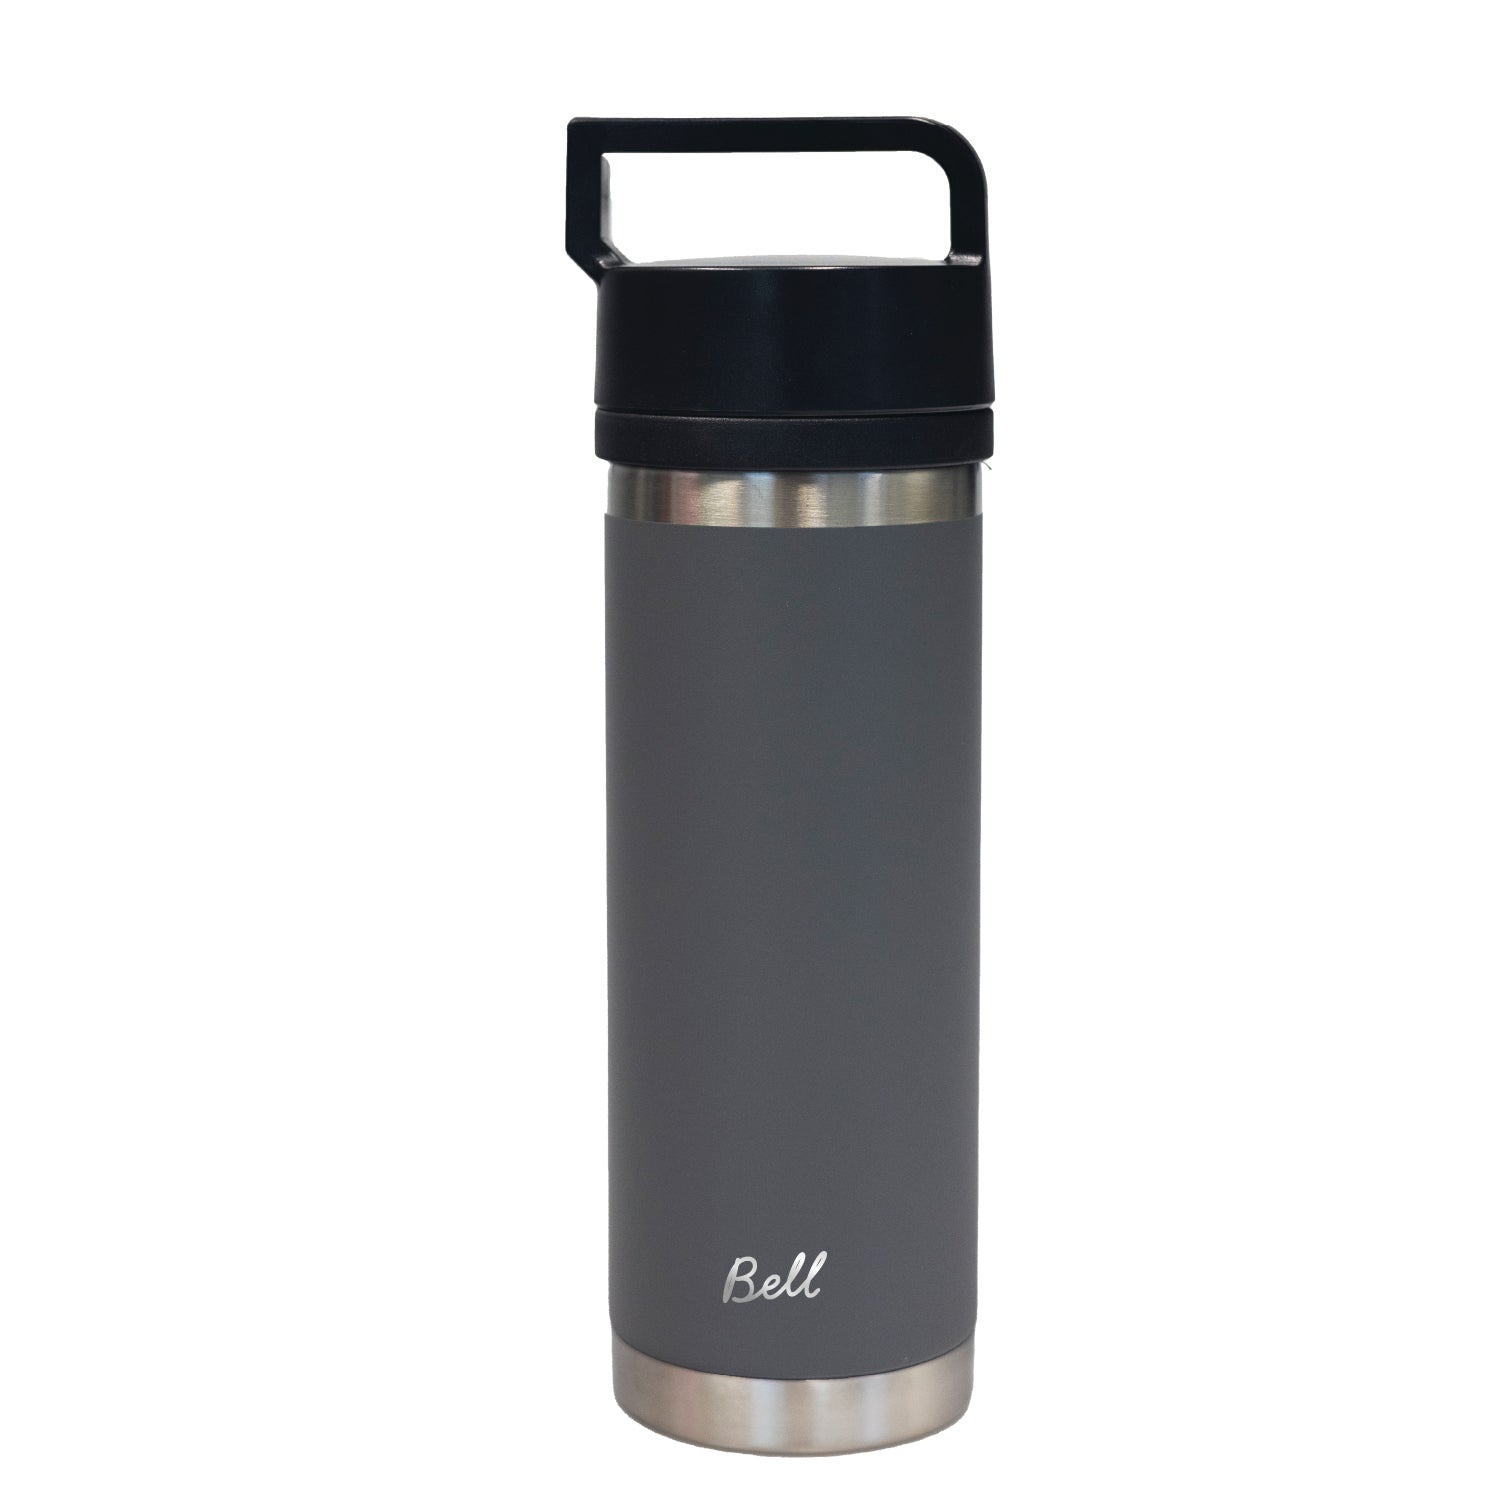 Bell Stainless Steel - Solid Handle - 532ml (18oz)